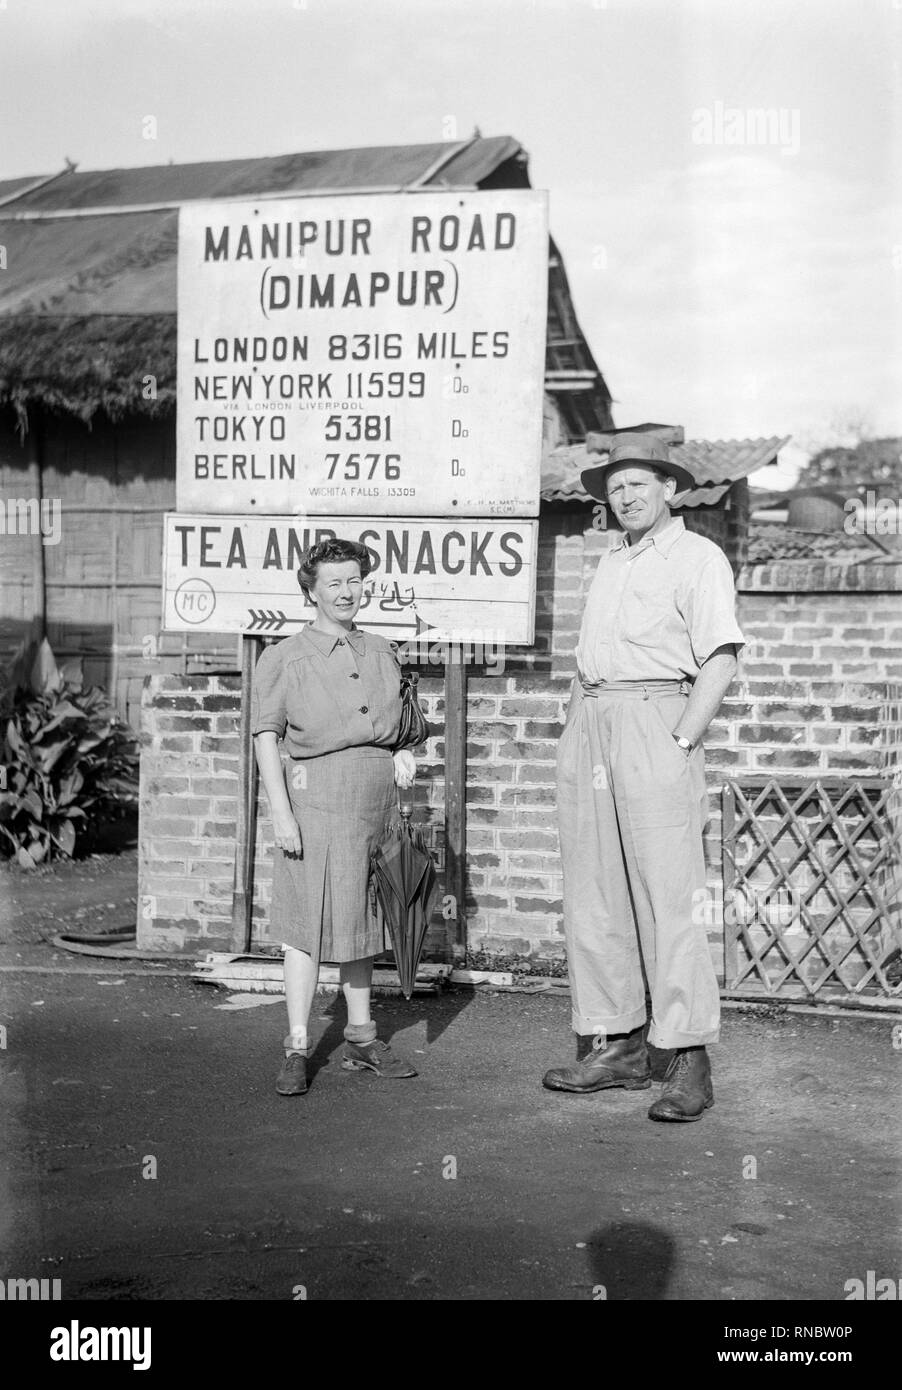 A middle age white European man and woman posing in front of a sign for the Manipur Road in Dimapur, India. Manipur Road in Dimapur (State of Nāgāland) is a city located in India about 1,033 mi (or 1,663 km) east of New Delhi, the country's capital town. Vintage mid twentieth century black and white photograph. Sign gives distances to various cities around the world. Stock Photo